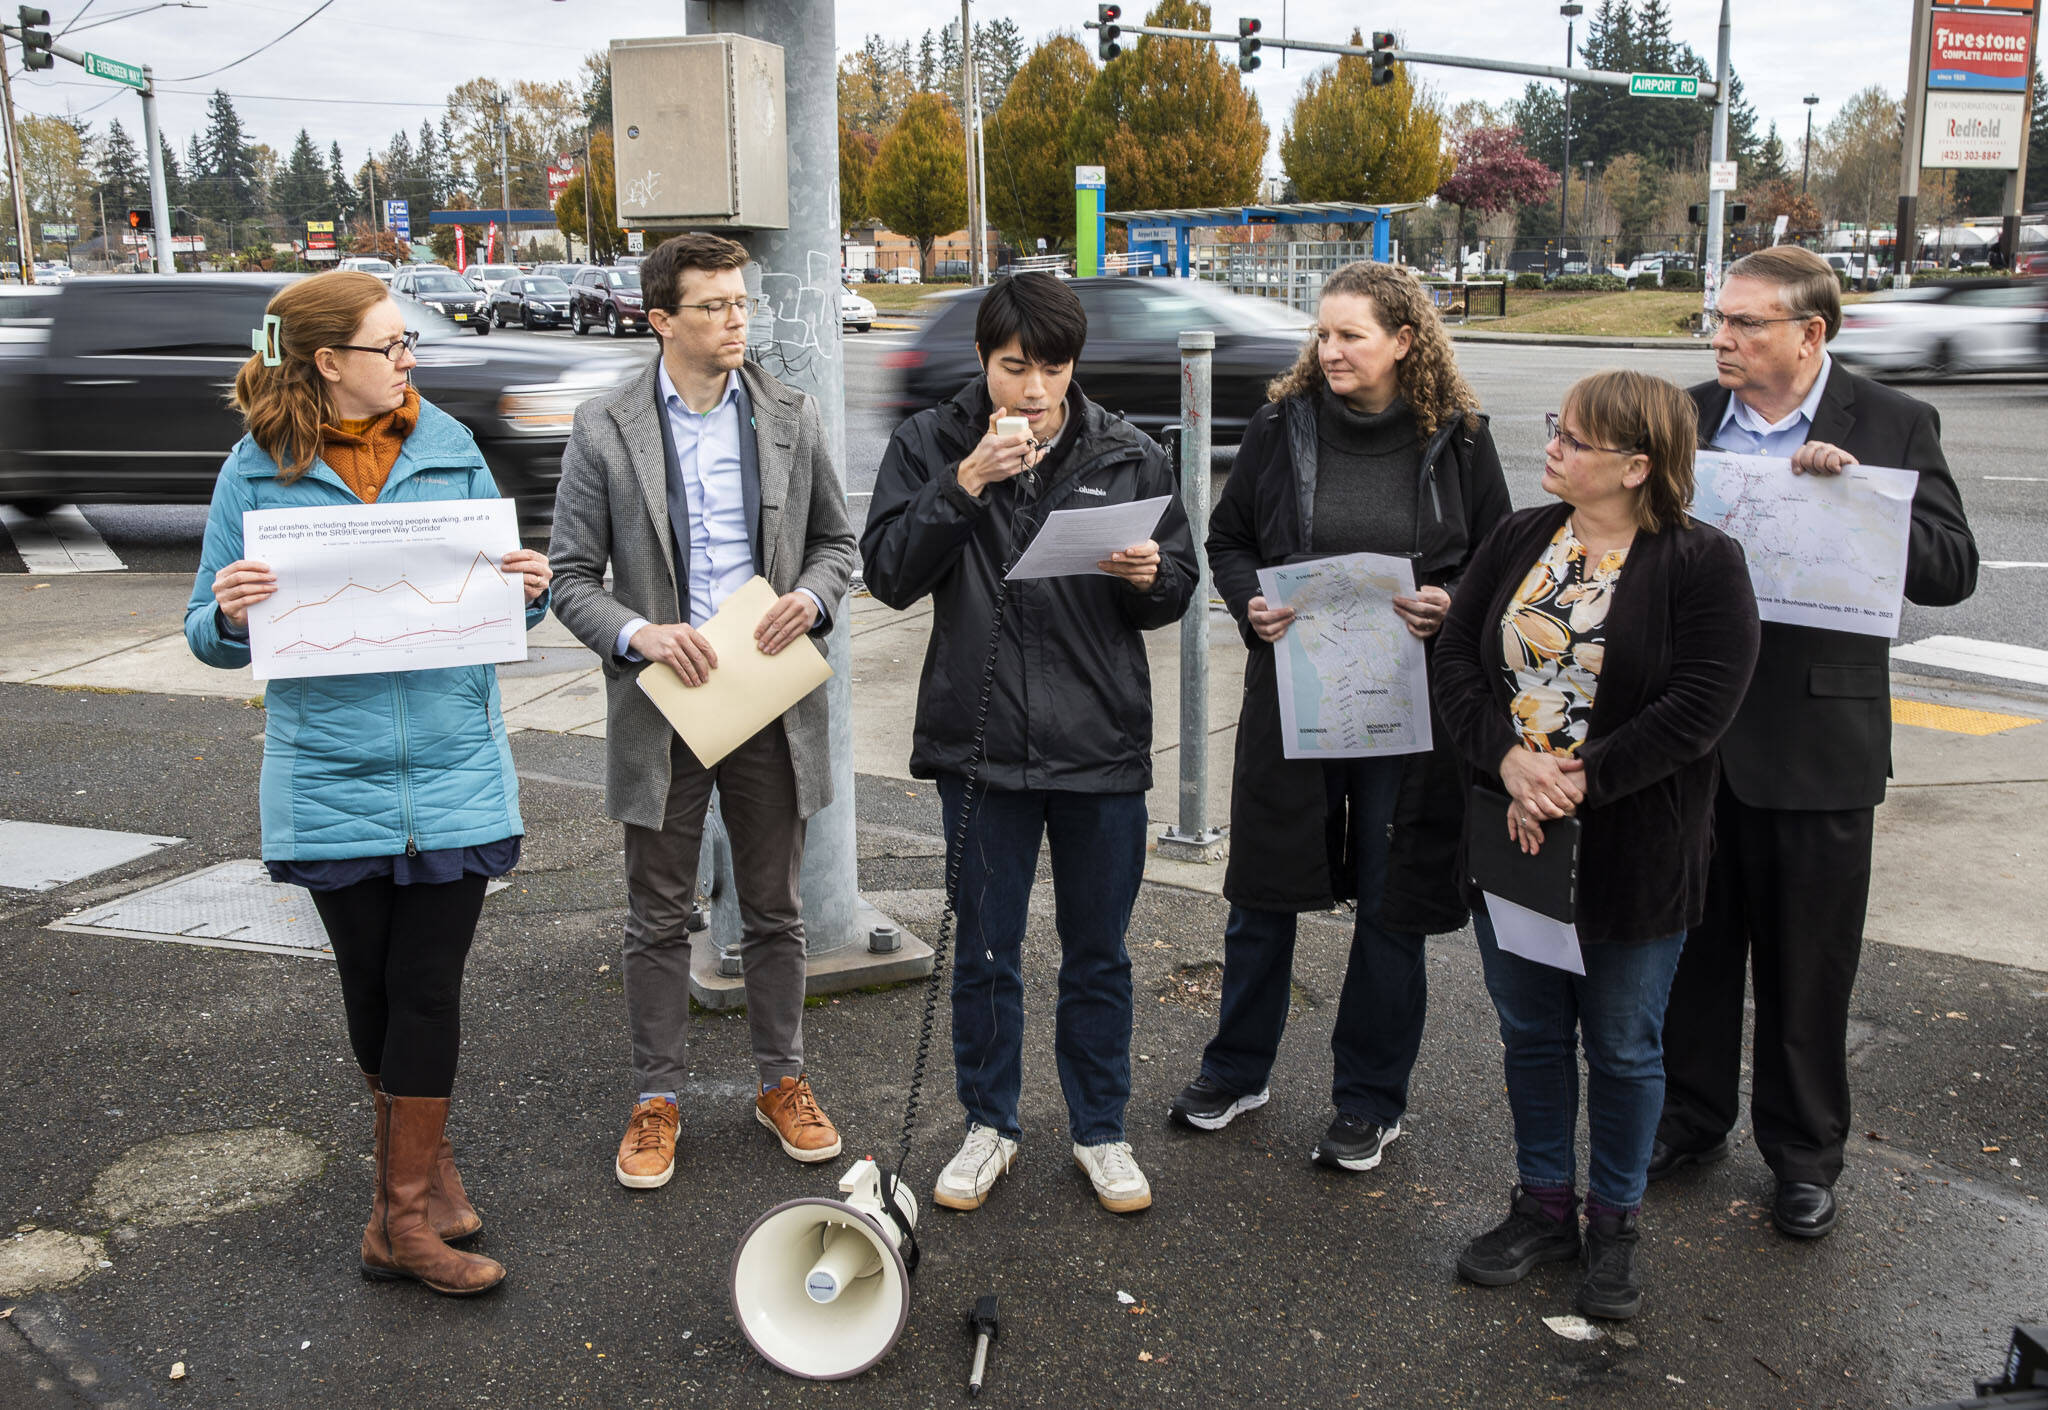 From left, Vicki Clarke, Brock Howell, Megan Dunn, Liz Vogeli and George Hurst listen while Ed Engel speaks during a press conference for World Day of Remembrance for Road Traffic Victims on Monday in Everett. (Olivia Vanni / The Herald)